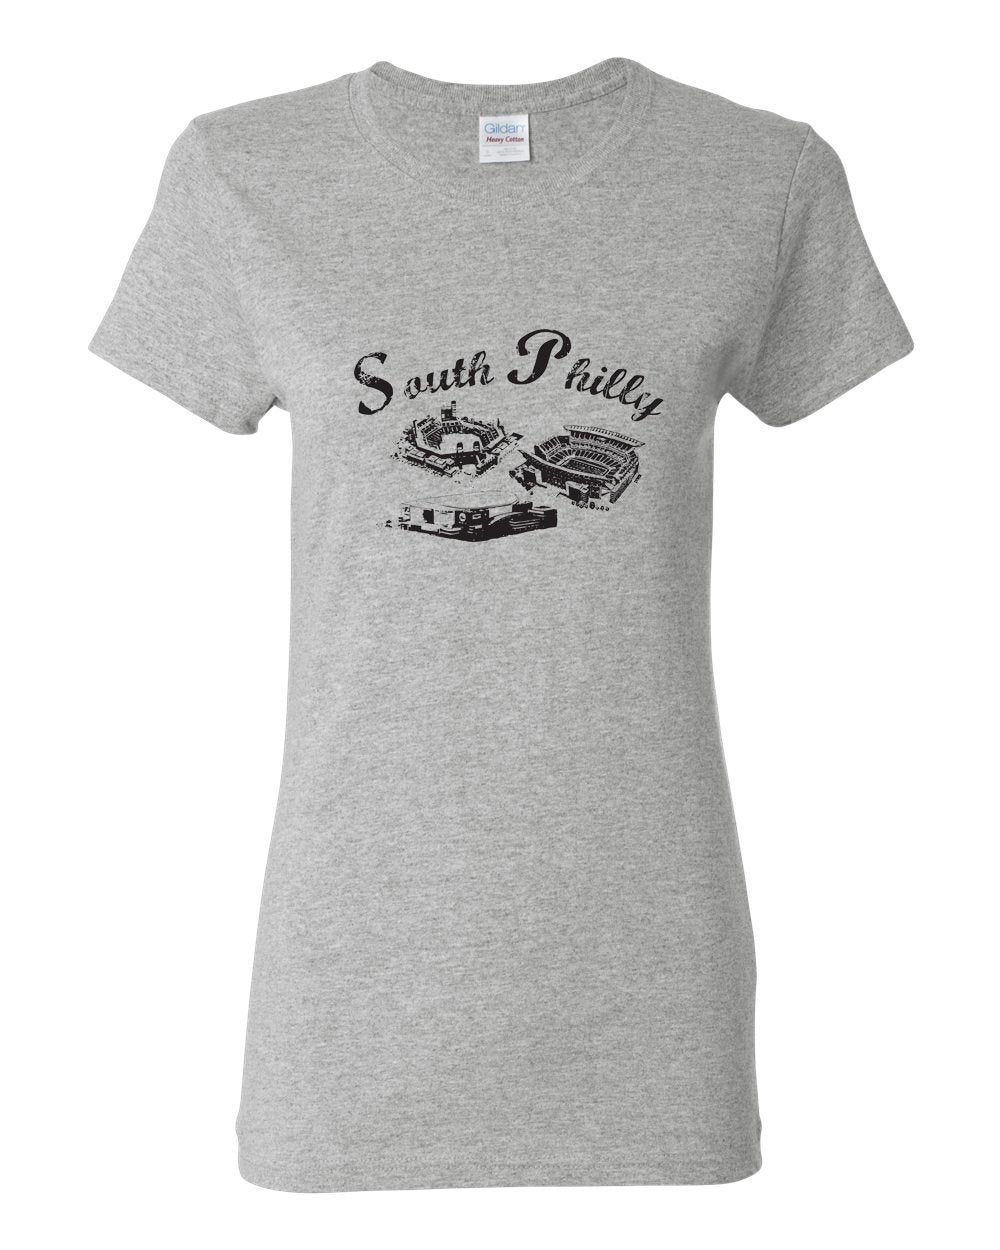 South Philly LADIES Missy-Fit T-Shirt